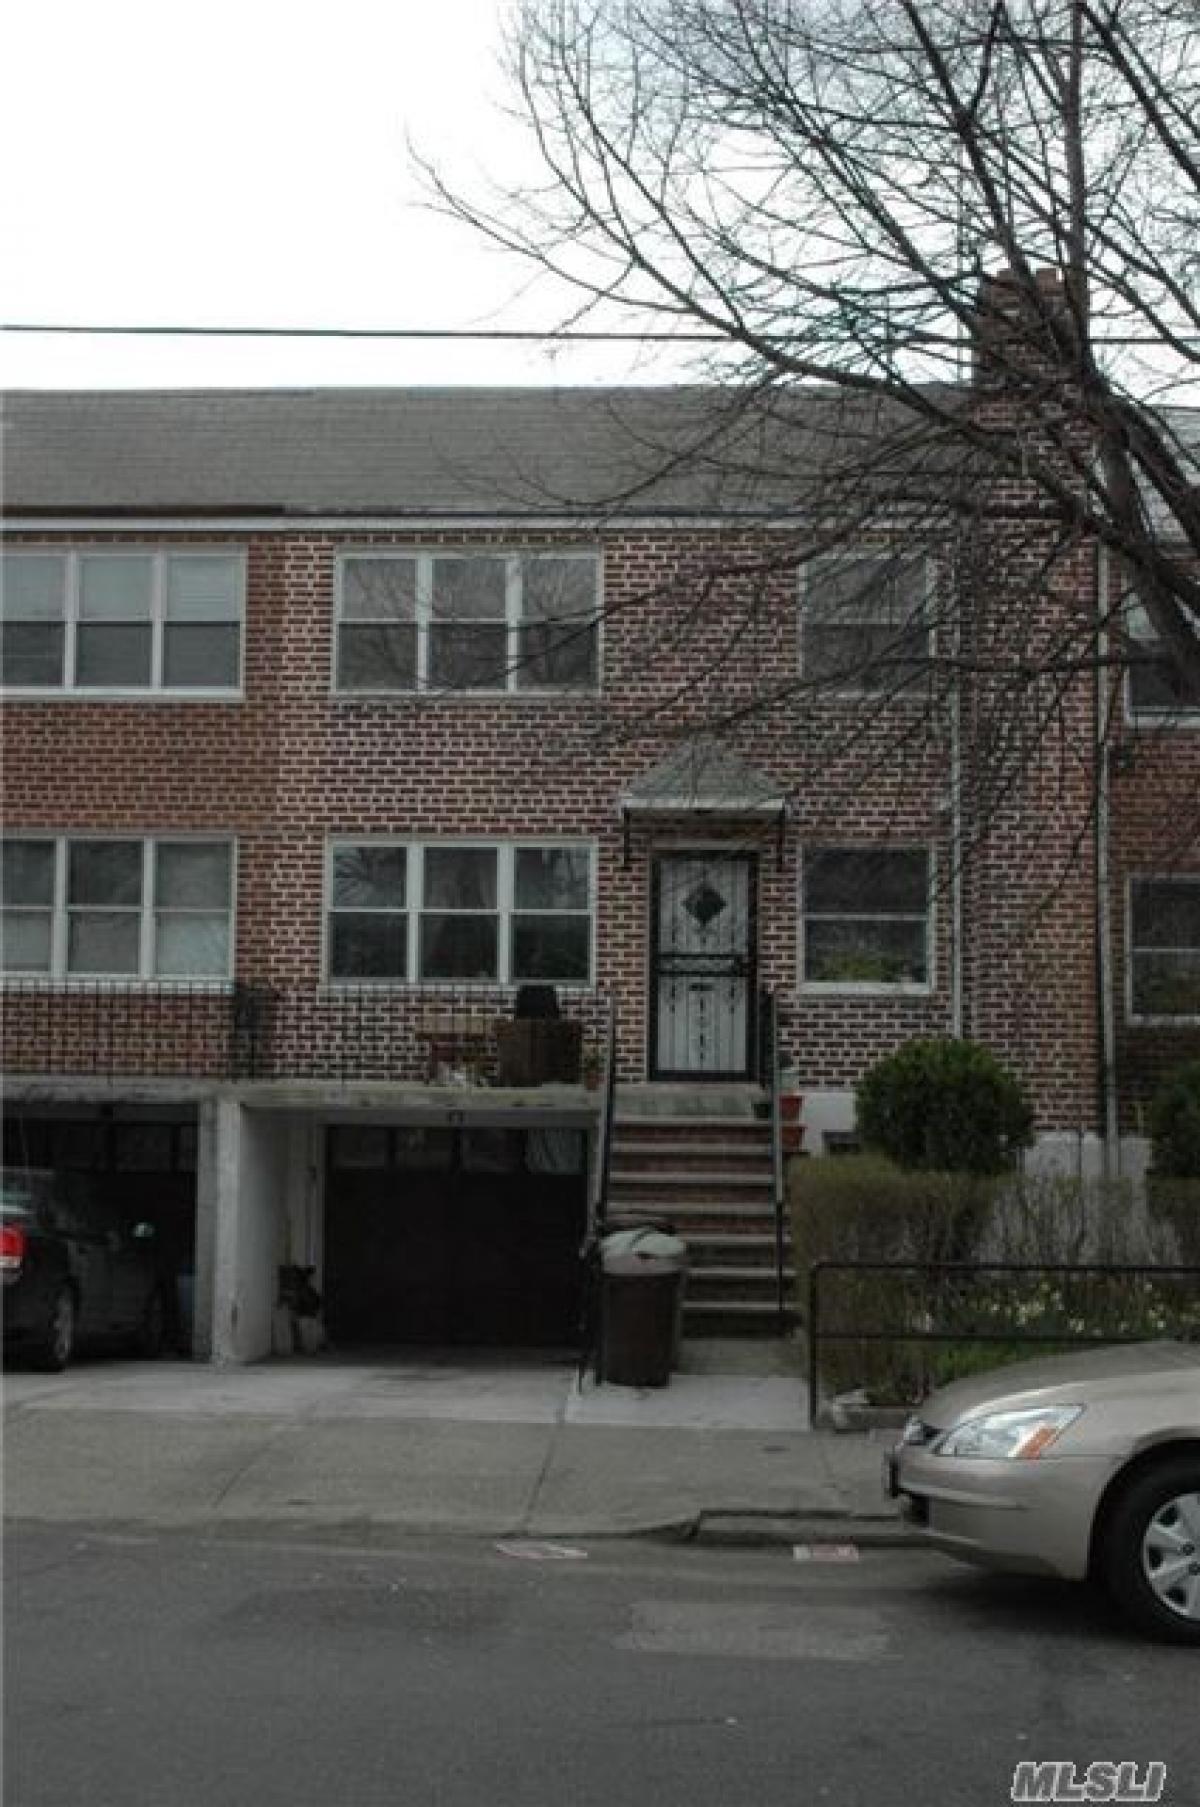 Picture of Apartment For Rent in Ridgewood, New York, United States